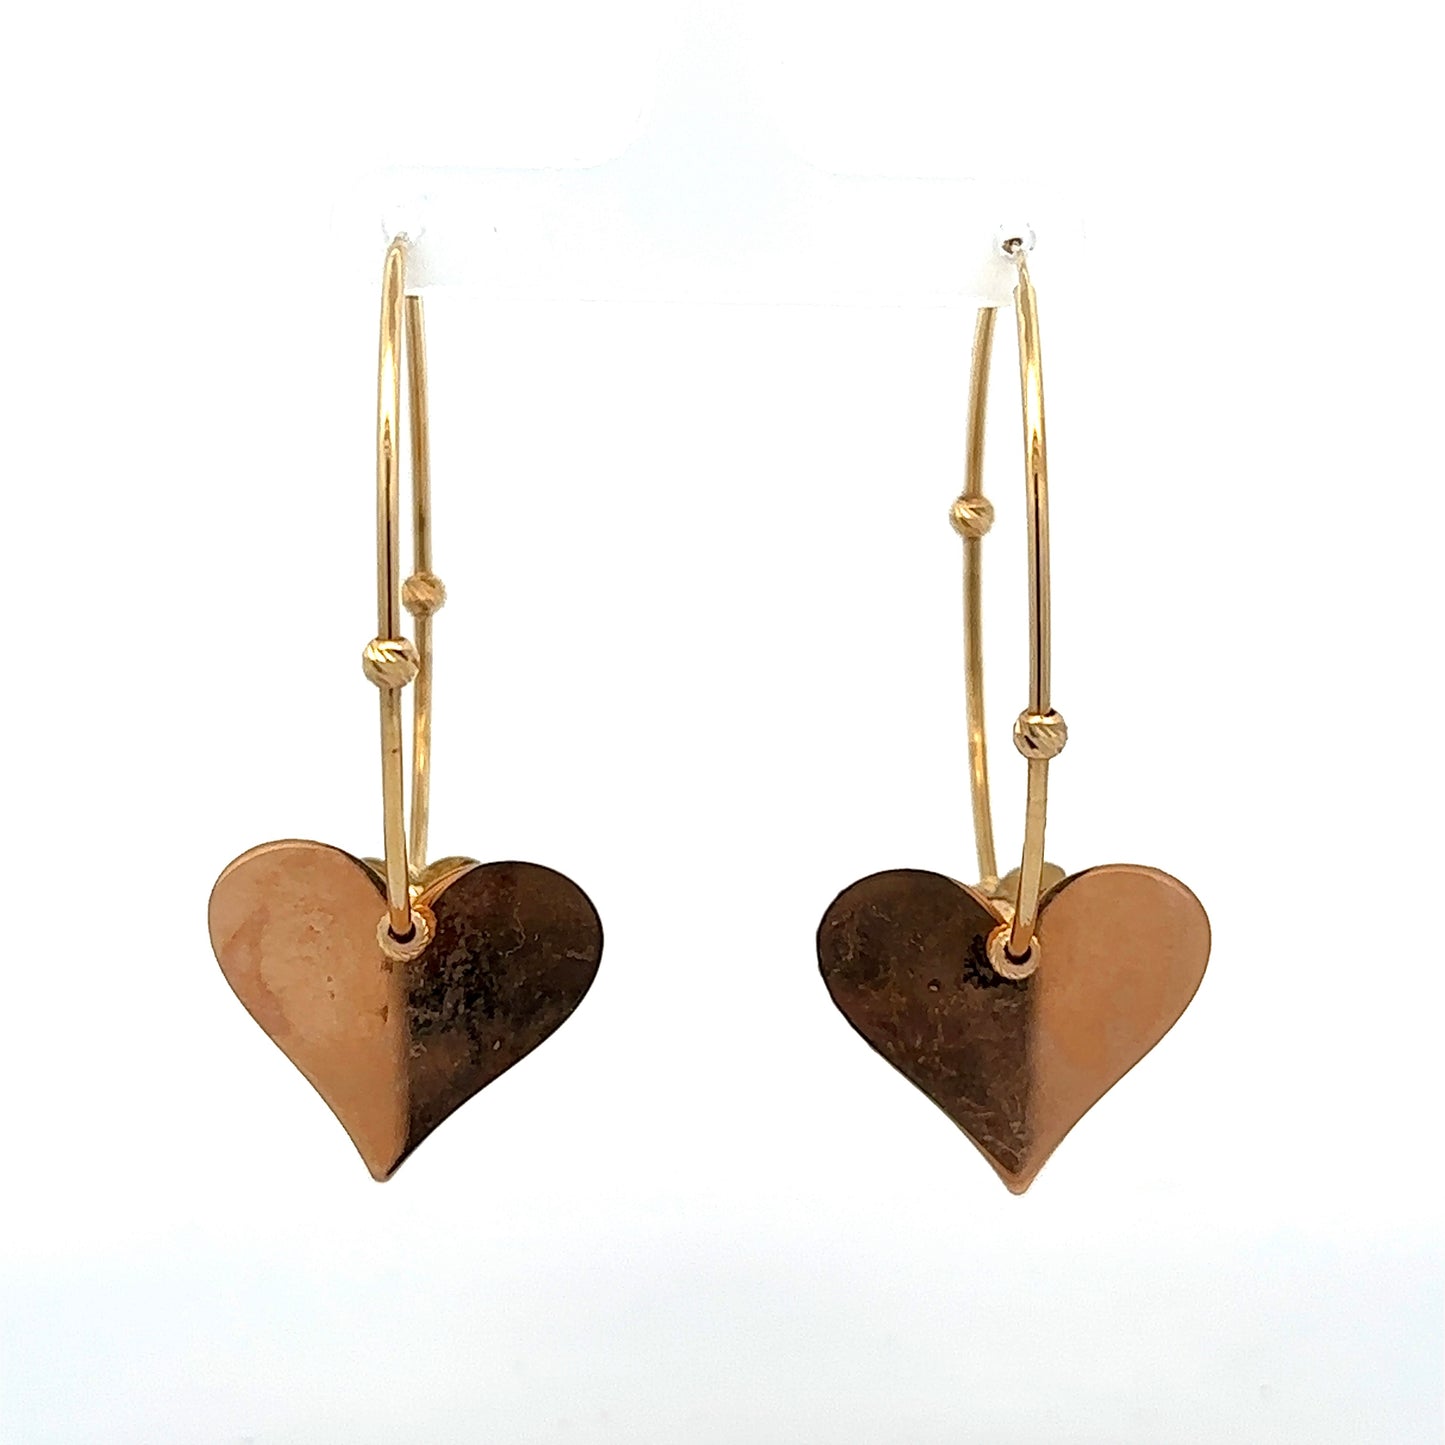 Back of hoops with rose gold hearts and marks on the back of the hearts